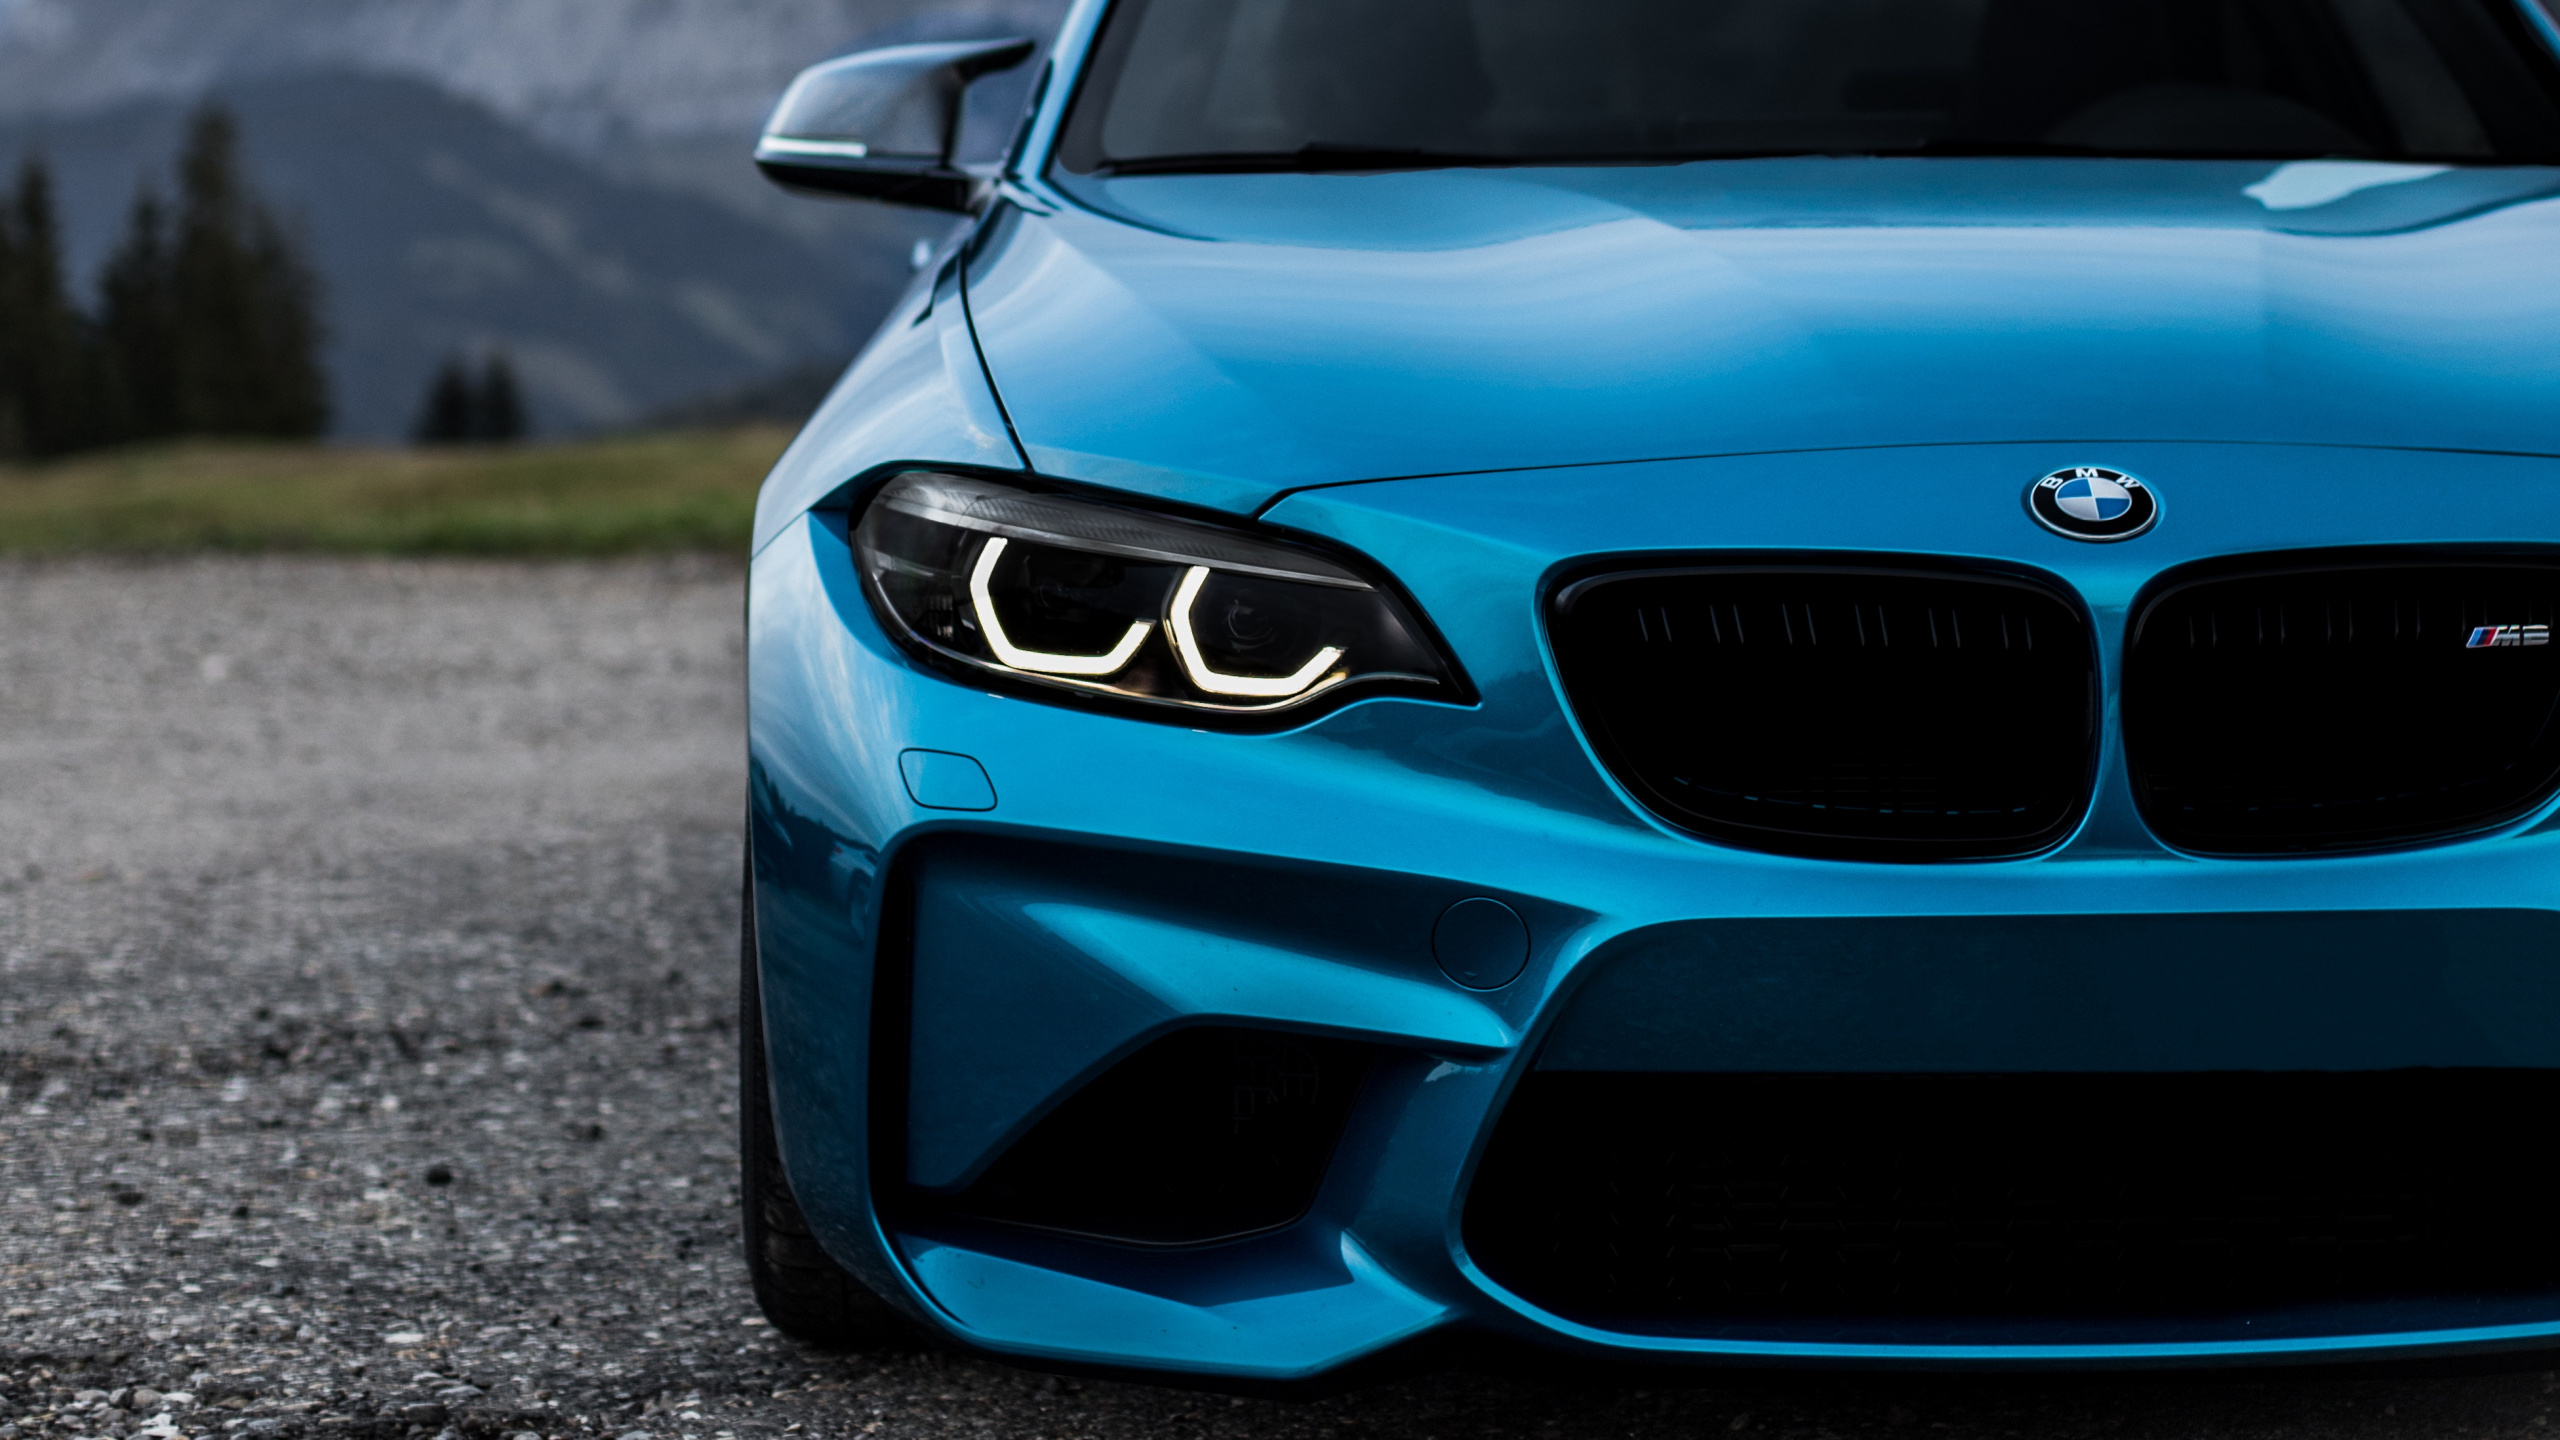 Blue Bmw m 3 on Road During Daytime. Wallpaper in 2560x1440 Resolution